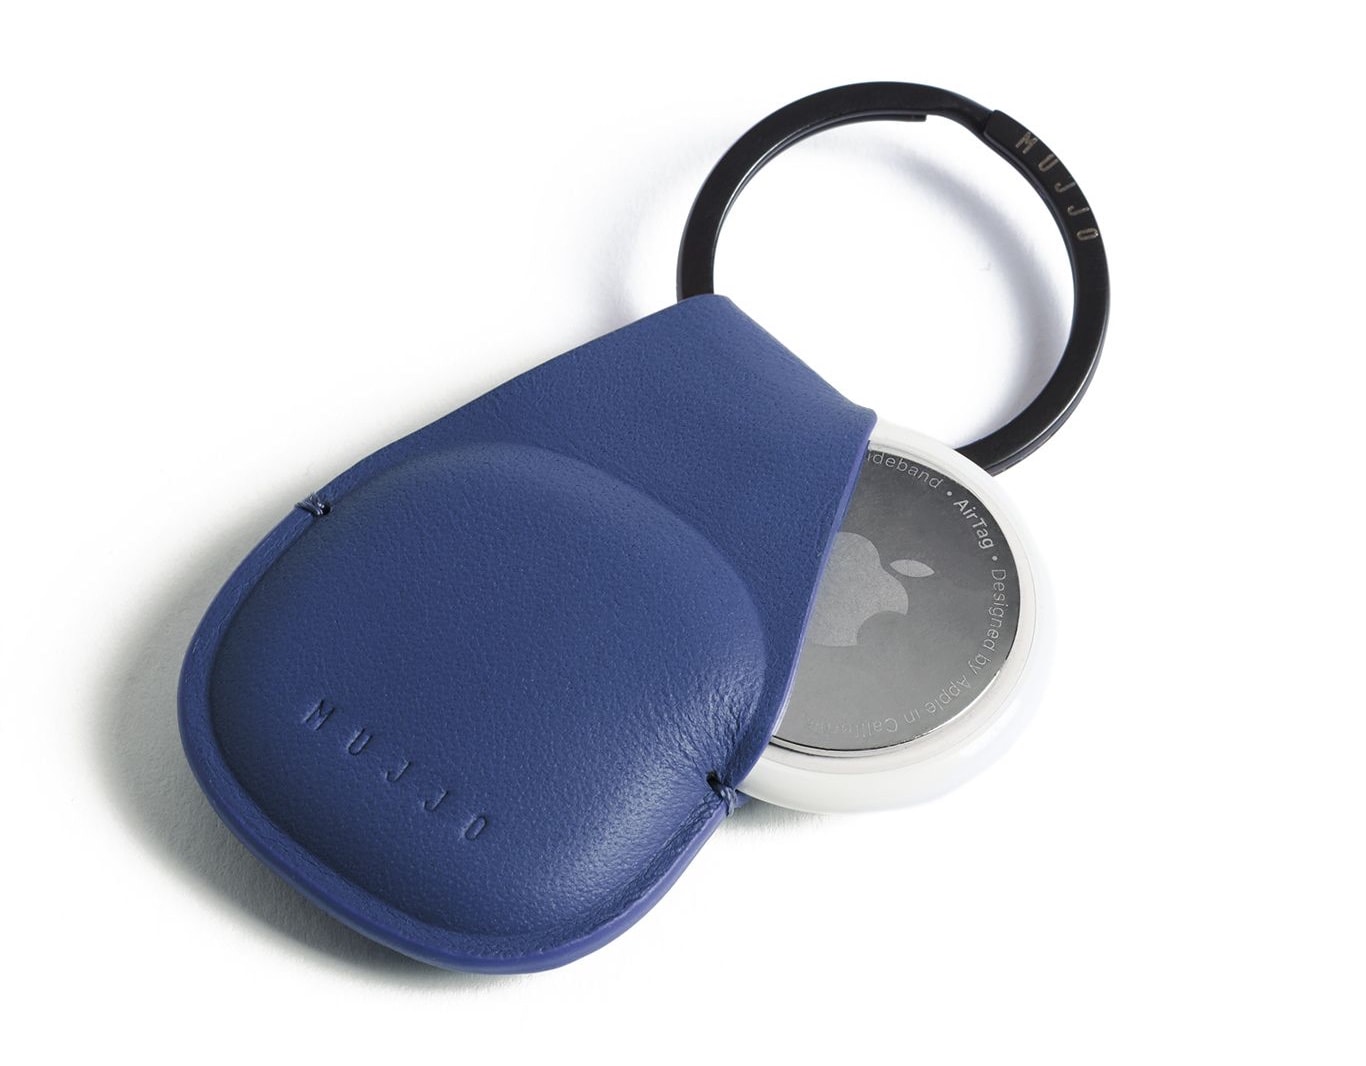 With an AirTag keychain, Find My will keep those keys from getting away from you.